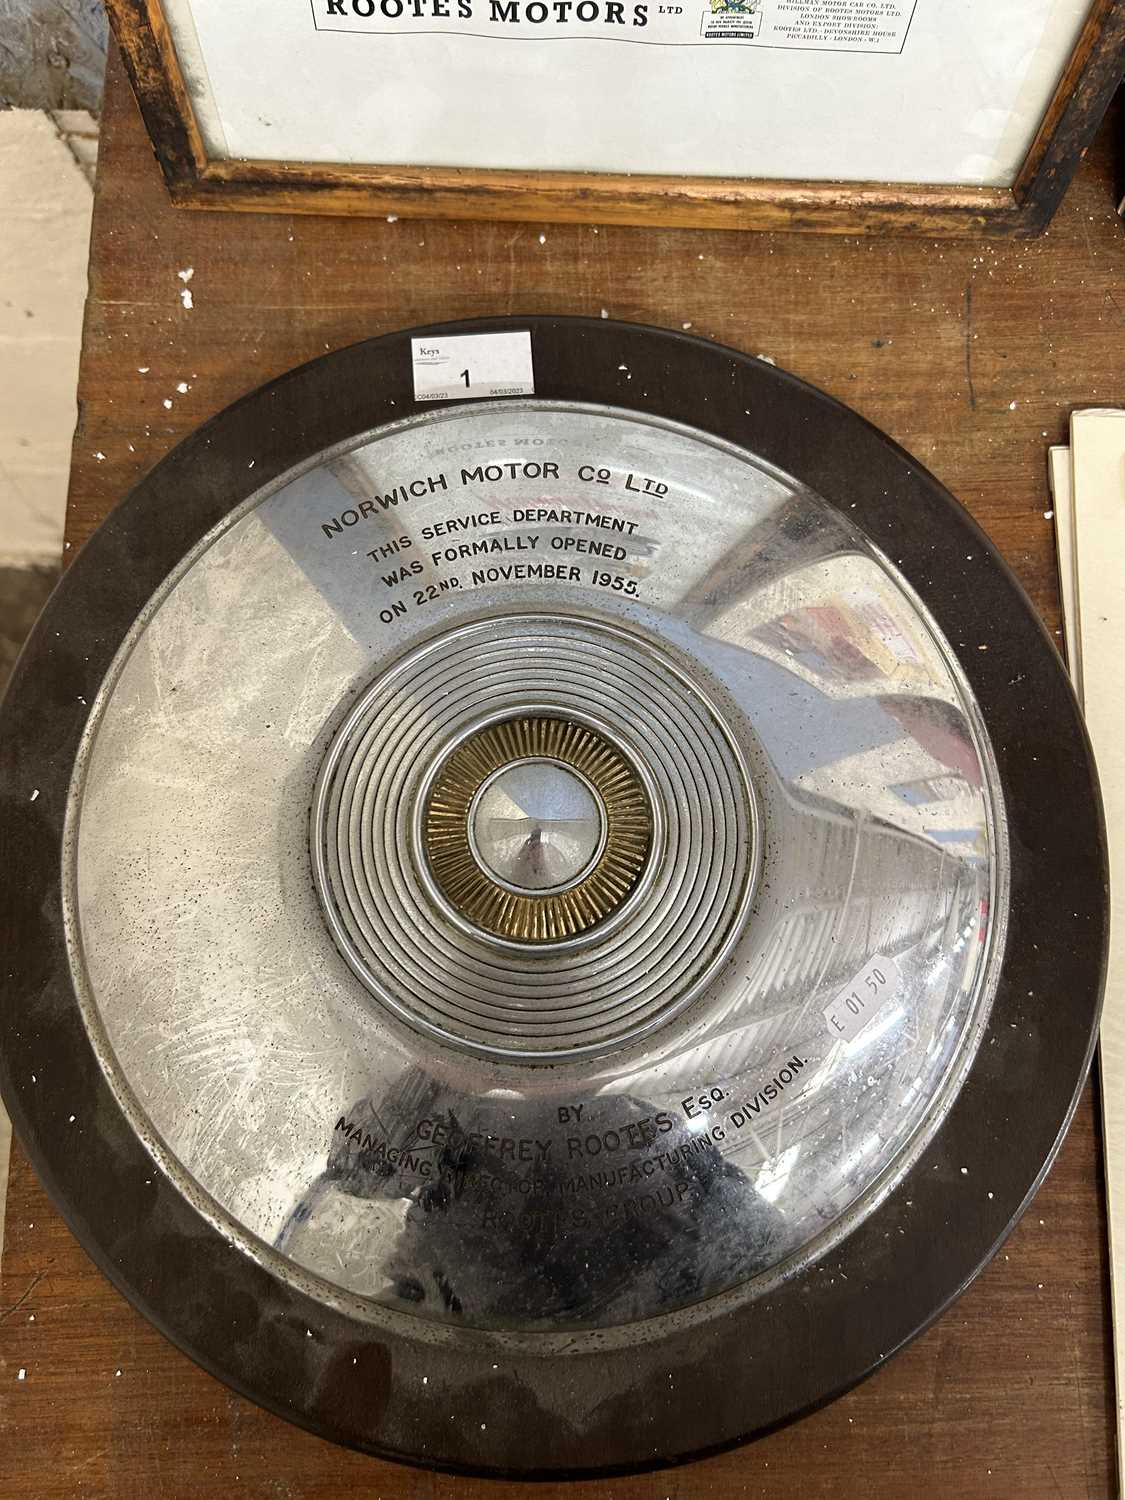 Mounted hub cap/Presentation plaque for the Norwich Motor Company Ltd, for the opening of the